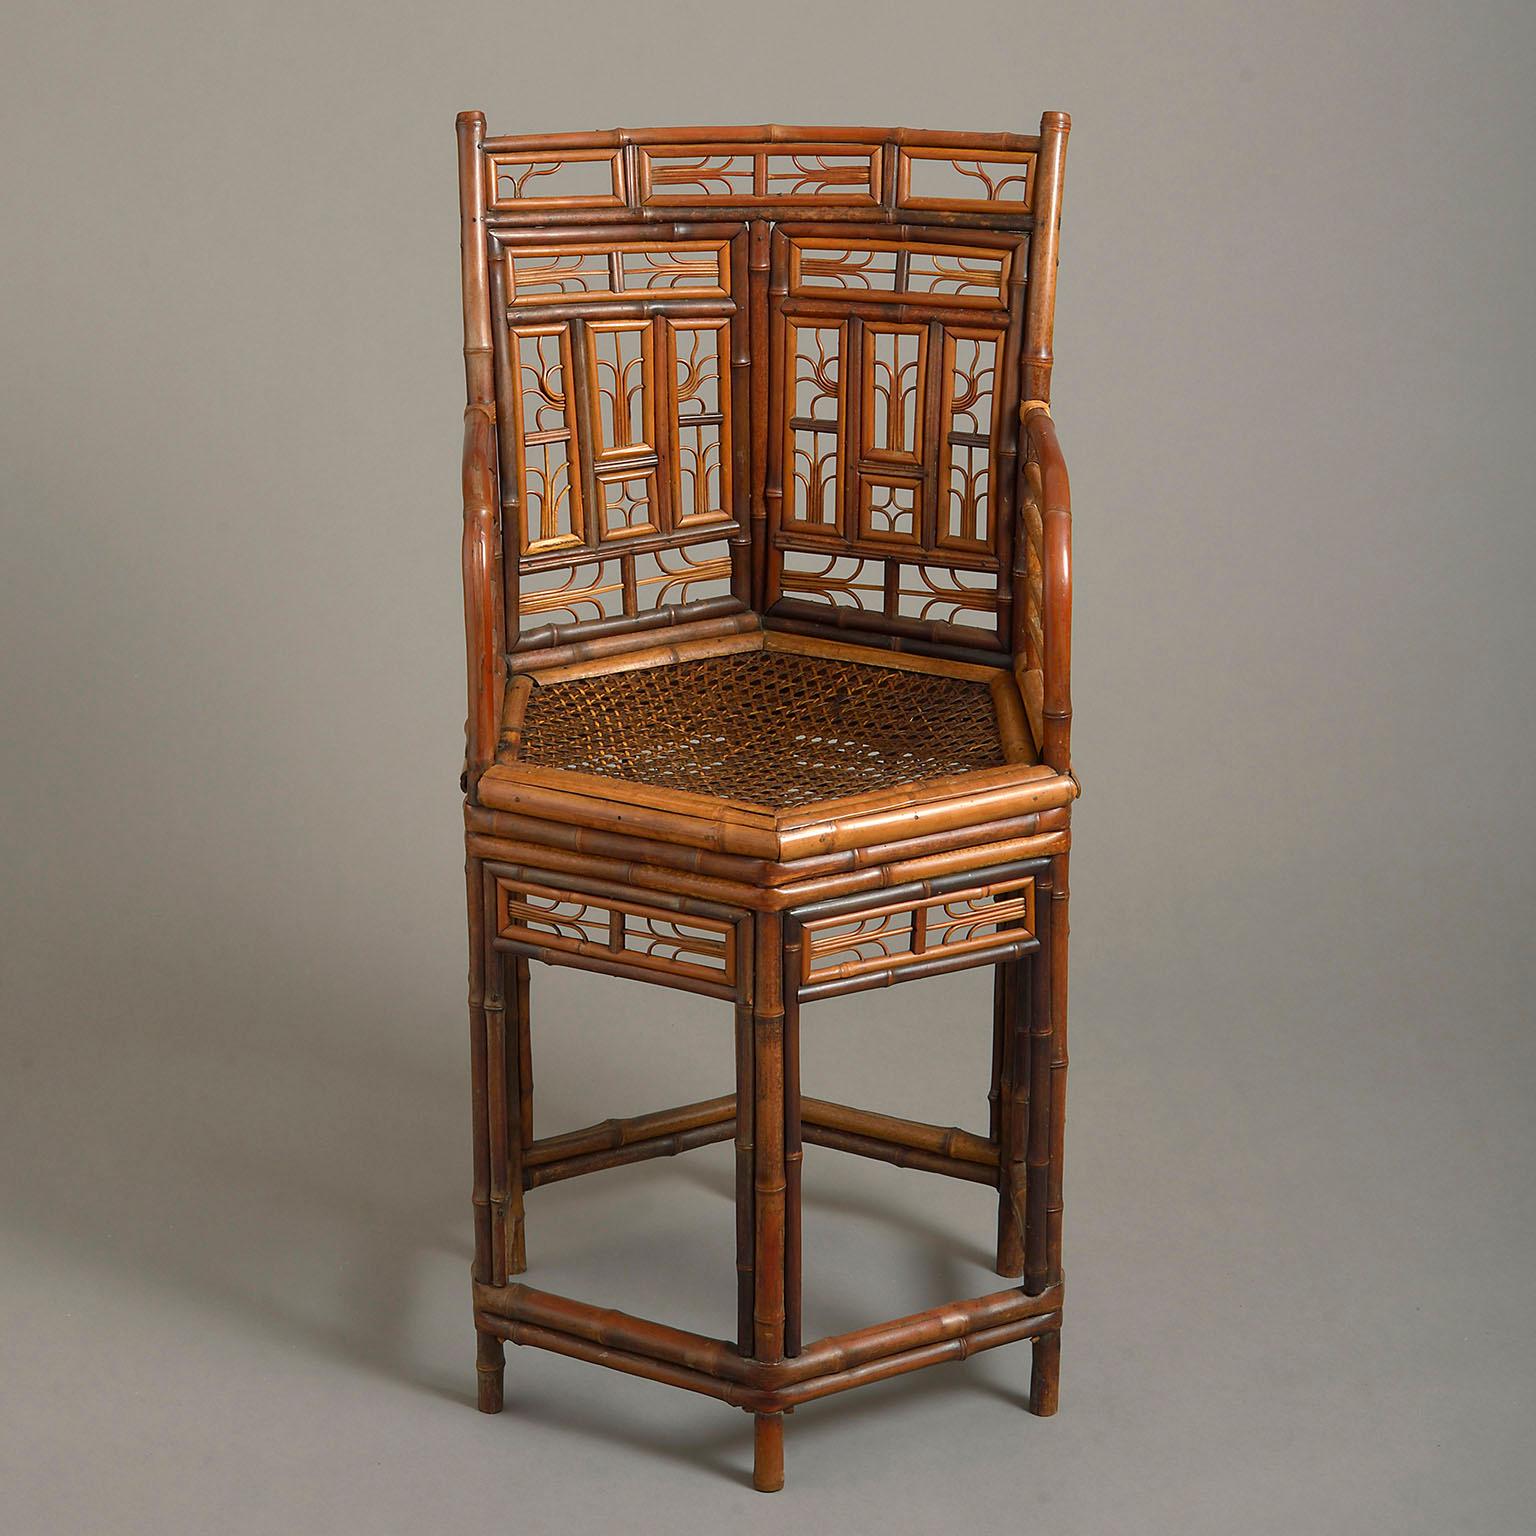 An early 19th century 'Brighton Pavillion' bamboo armchair of unusual hexagonal form, with elaborately trellised back and arms, caned seat and clustered bamboo legs and stretchers.